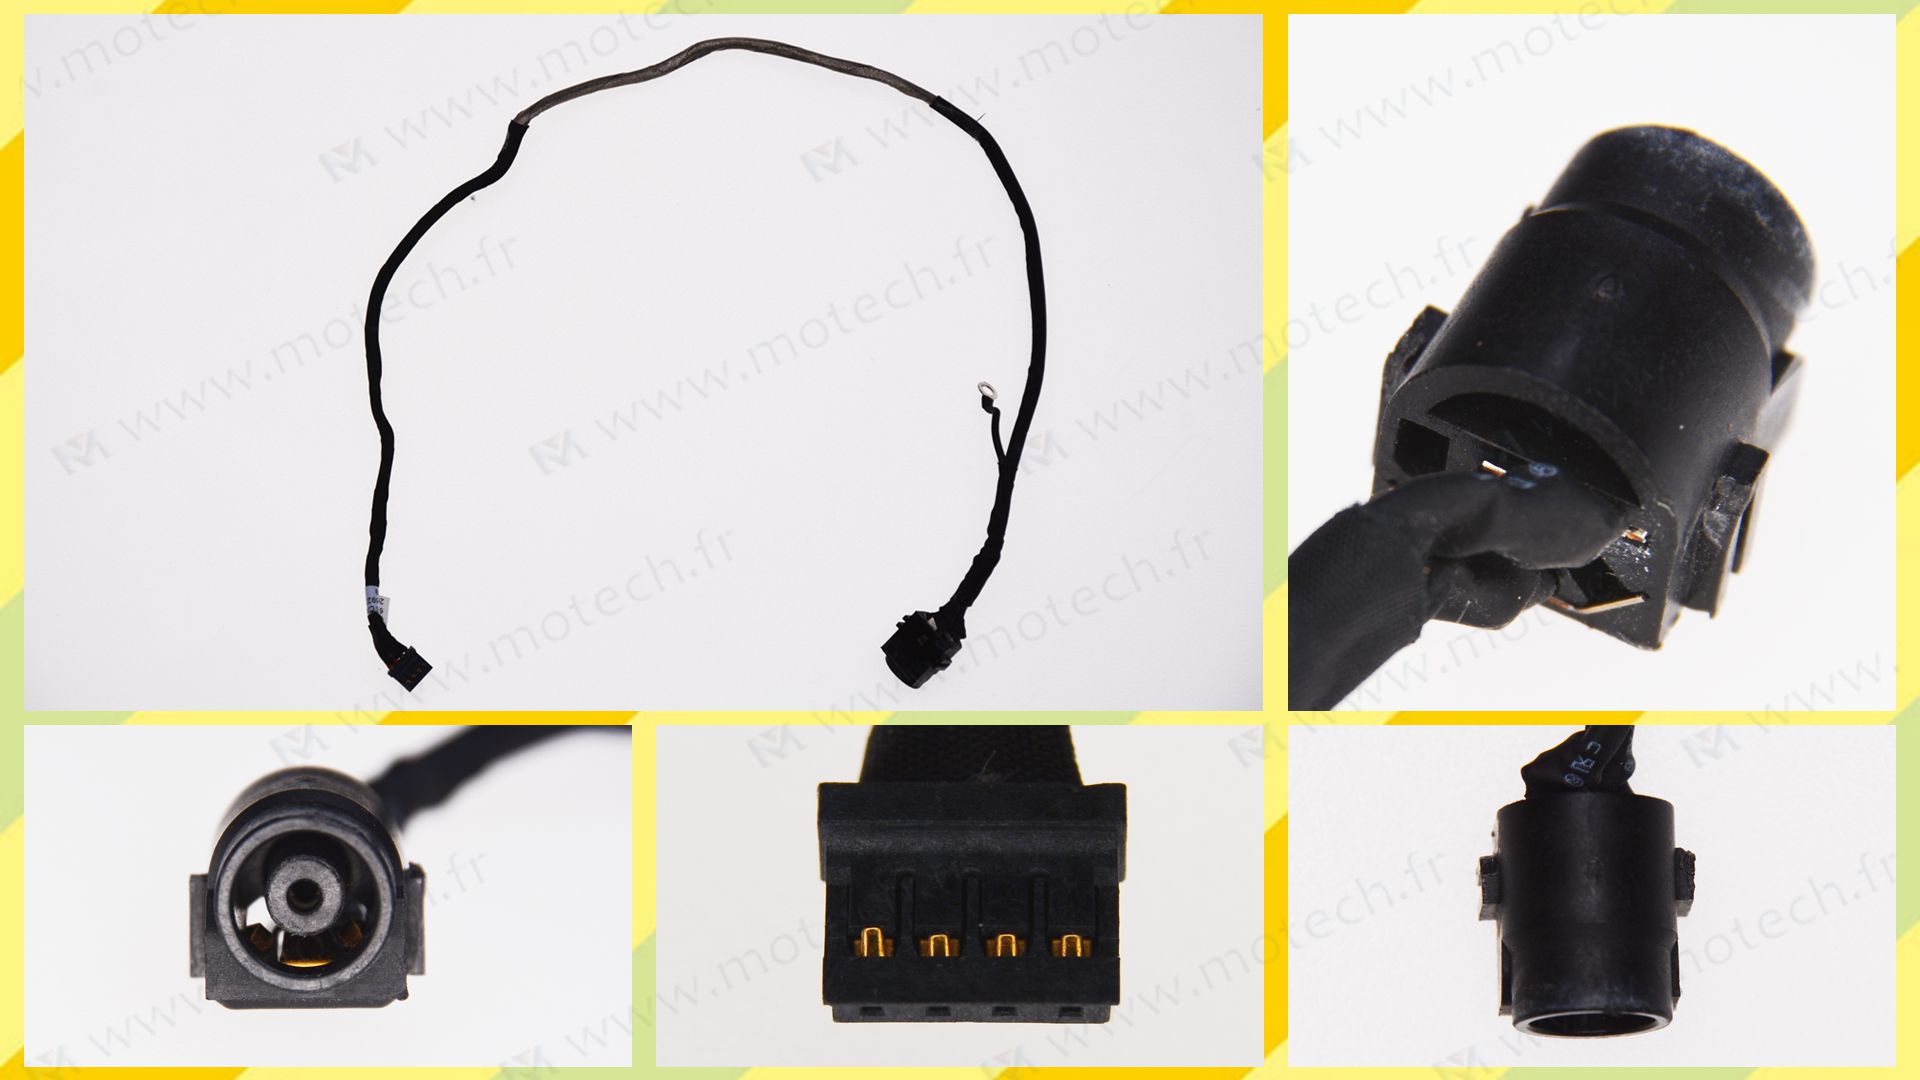 Sony VPCSB31FX charging connector, Sony VPCSB31FX DC Power Jack, Sony VPCSB31FX DC IN Cable, Sony VPCSB31FX Power Jack, Sony VPCSB31FX plug, Sony VPCSB31FX Jack socket, Sony VPCSB31FX connecteur de charge, 